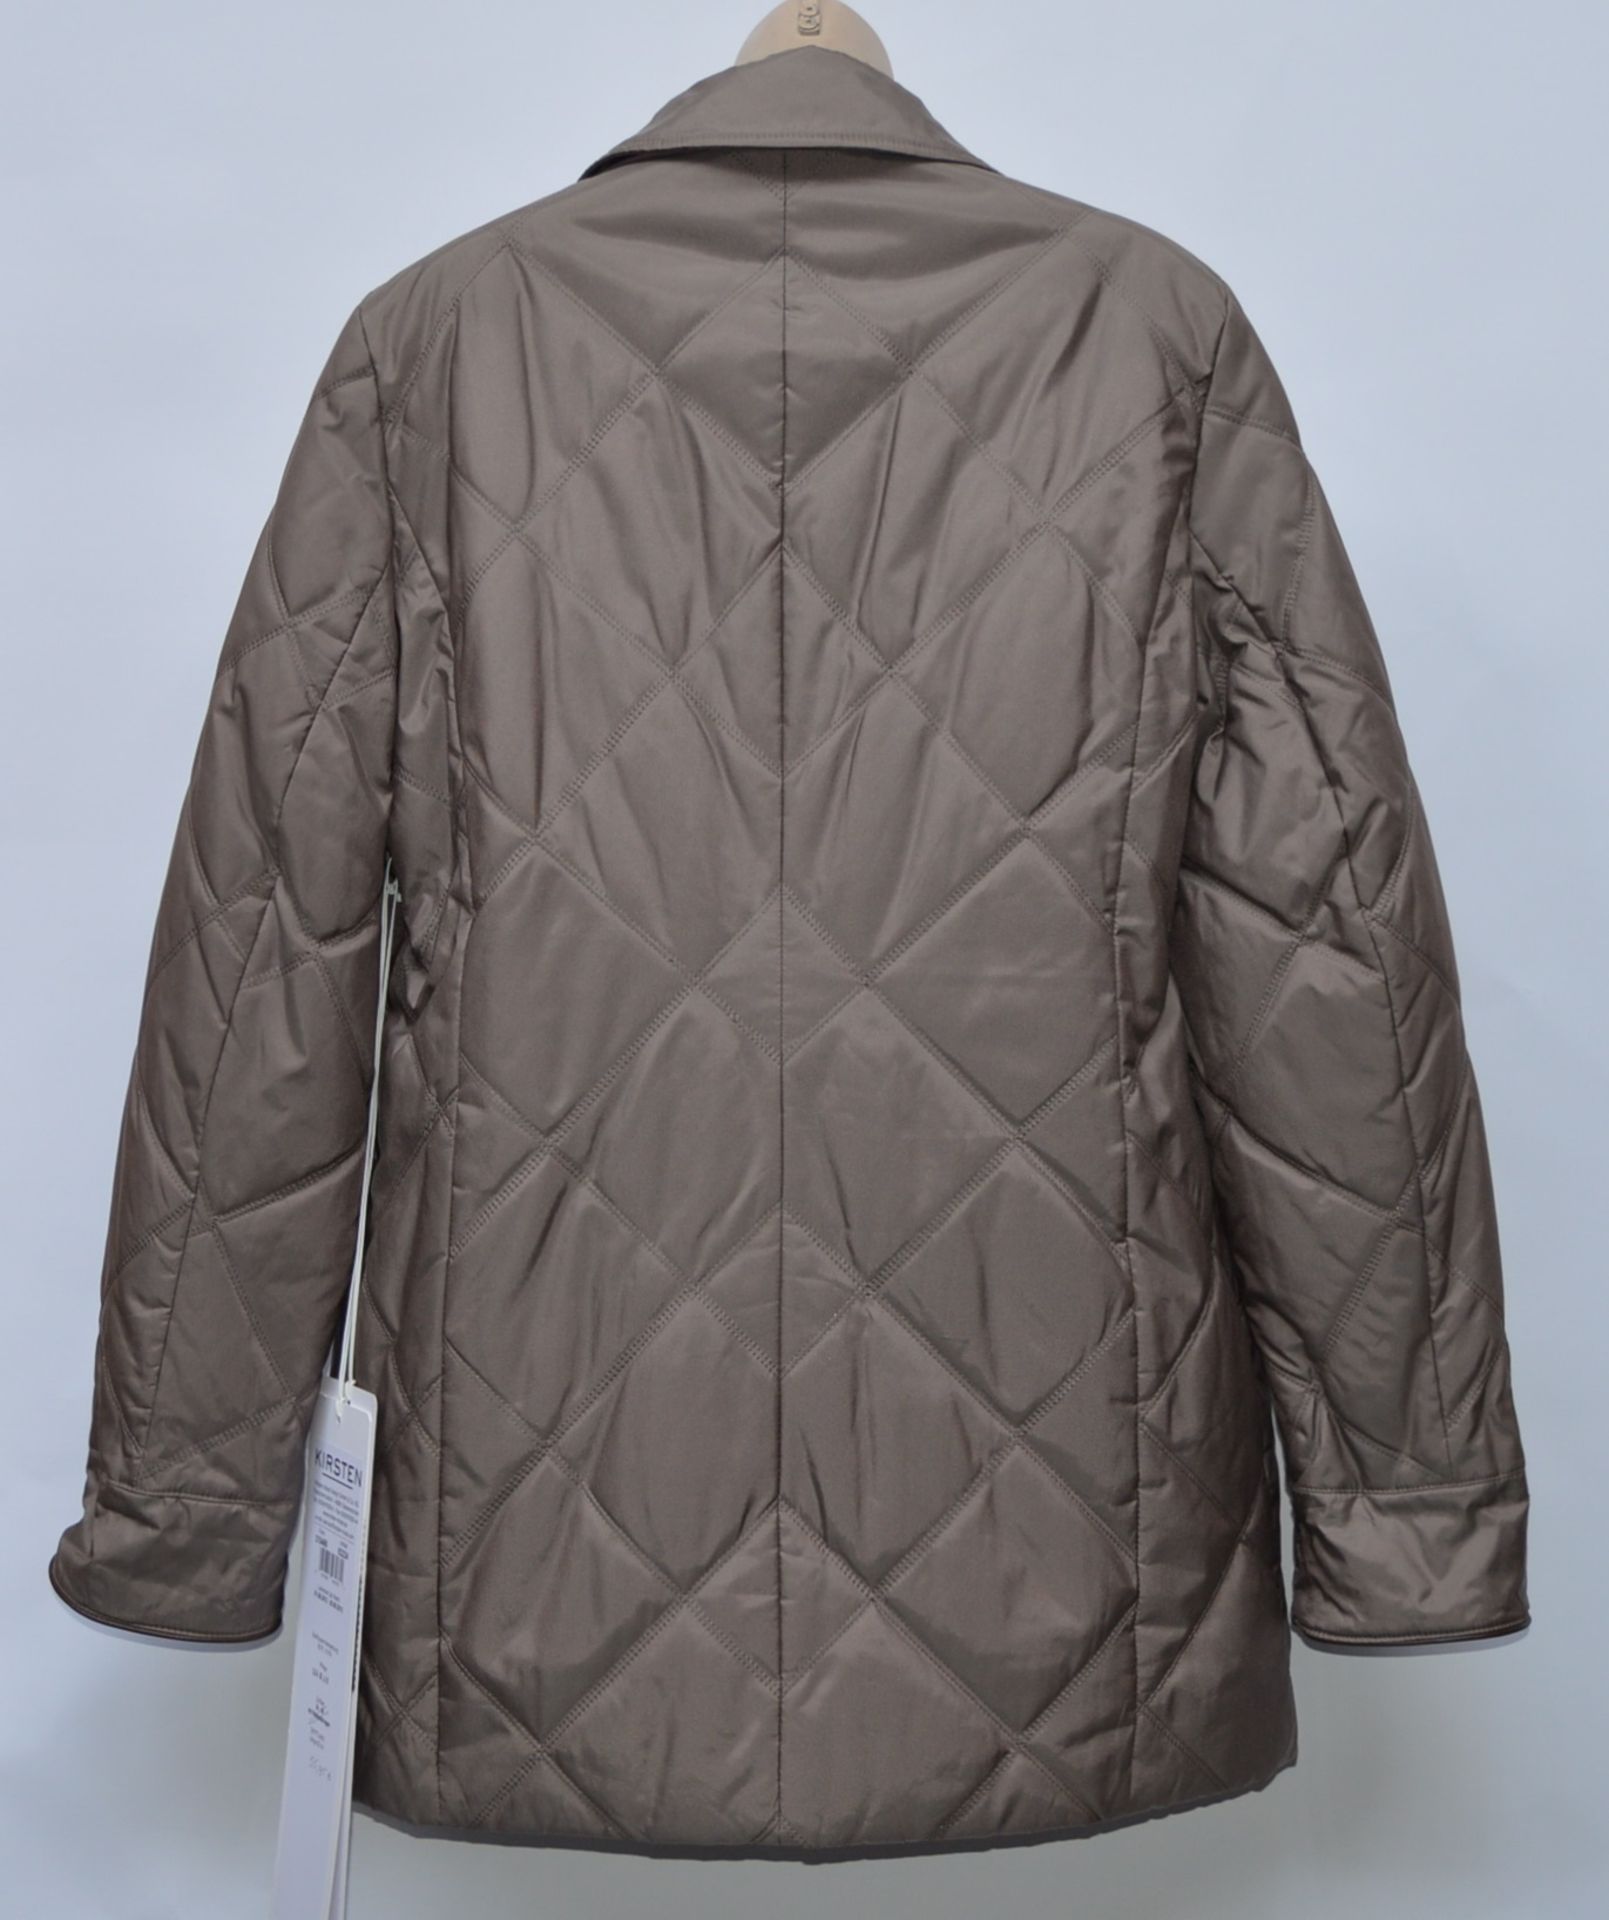 1 x Steilmann KSTN By Kirsten Womens Coat - Padded Coat With Functional Pockets, Inner Pocket and - Image 2 of 12